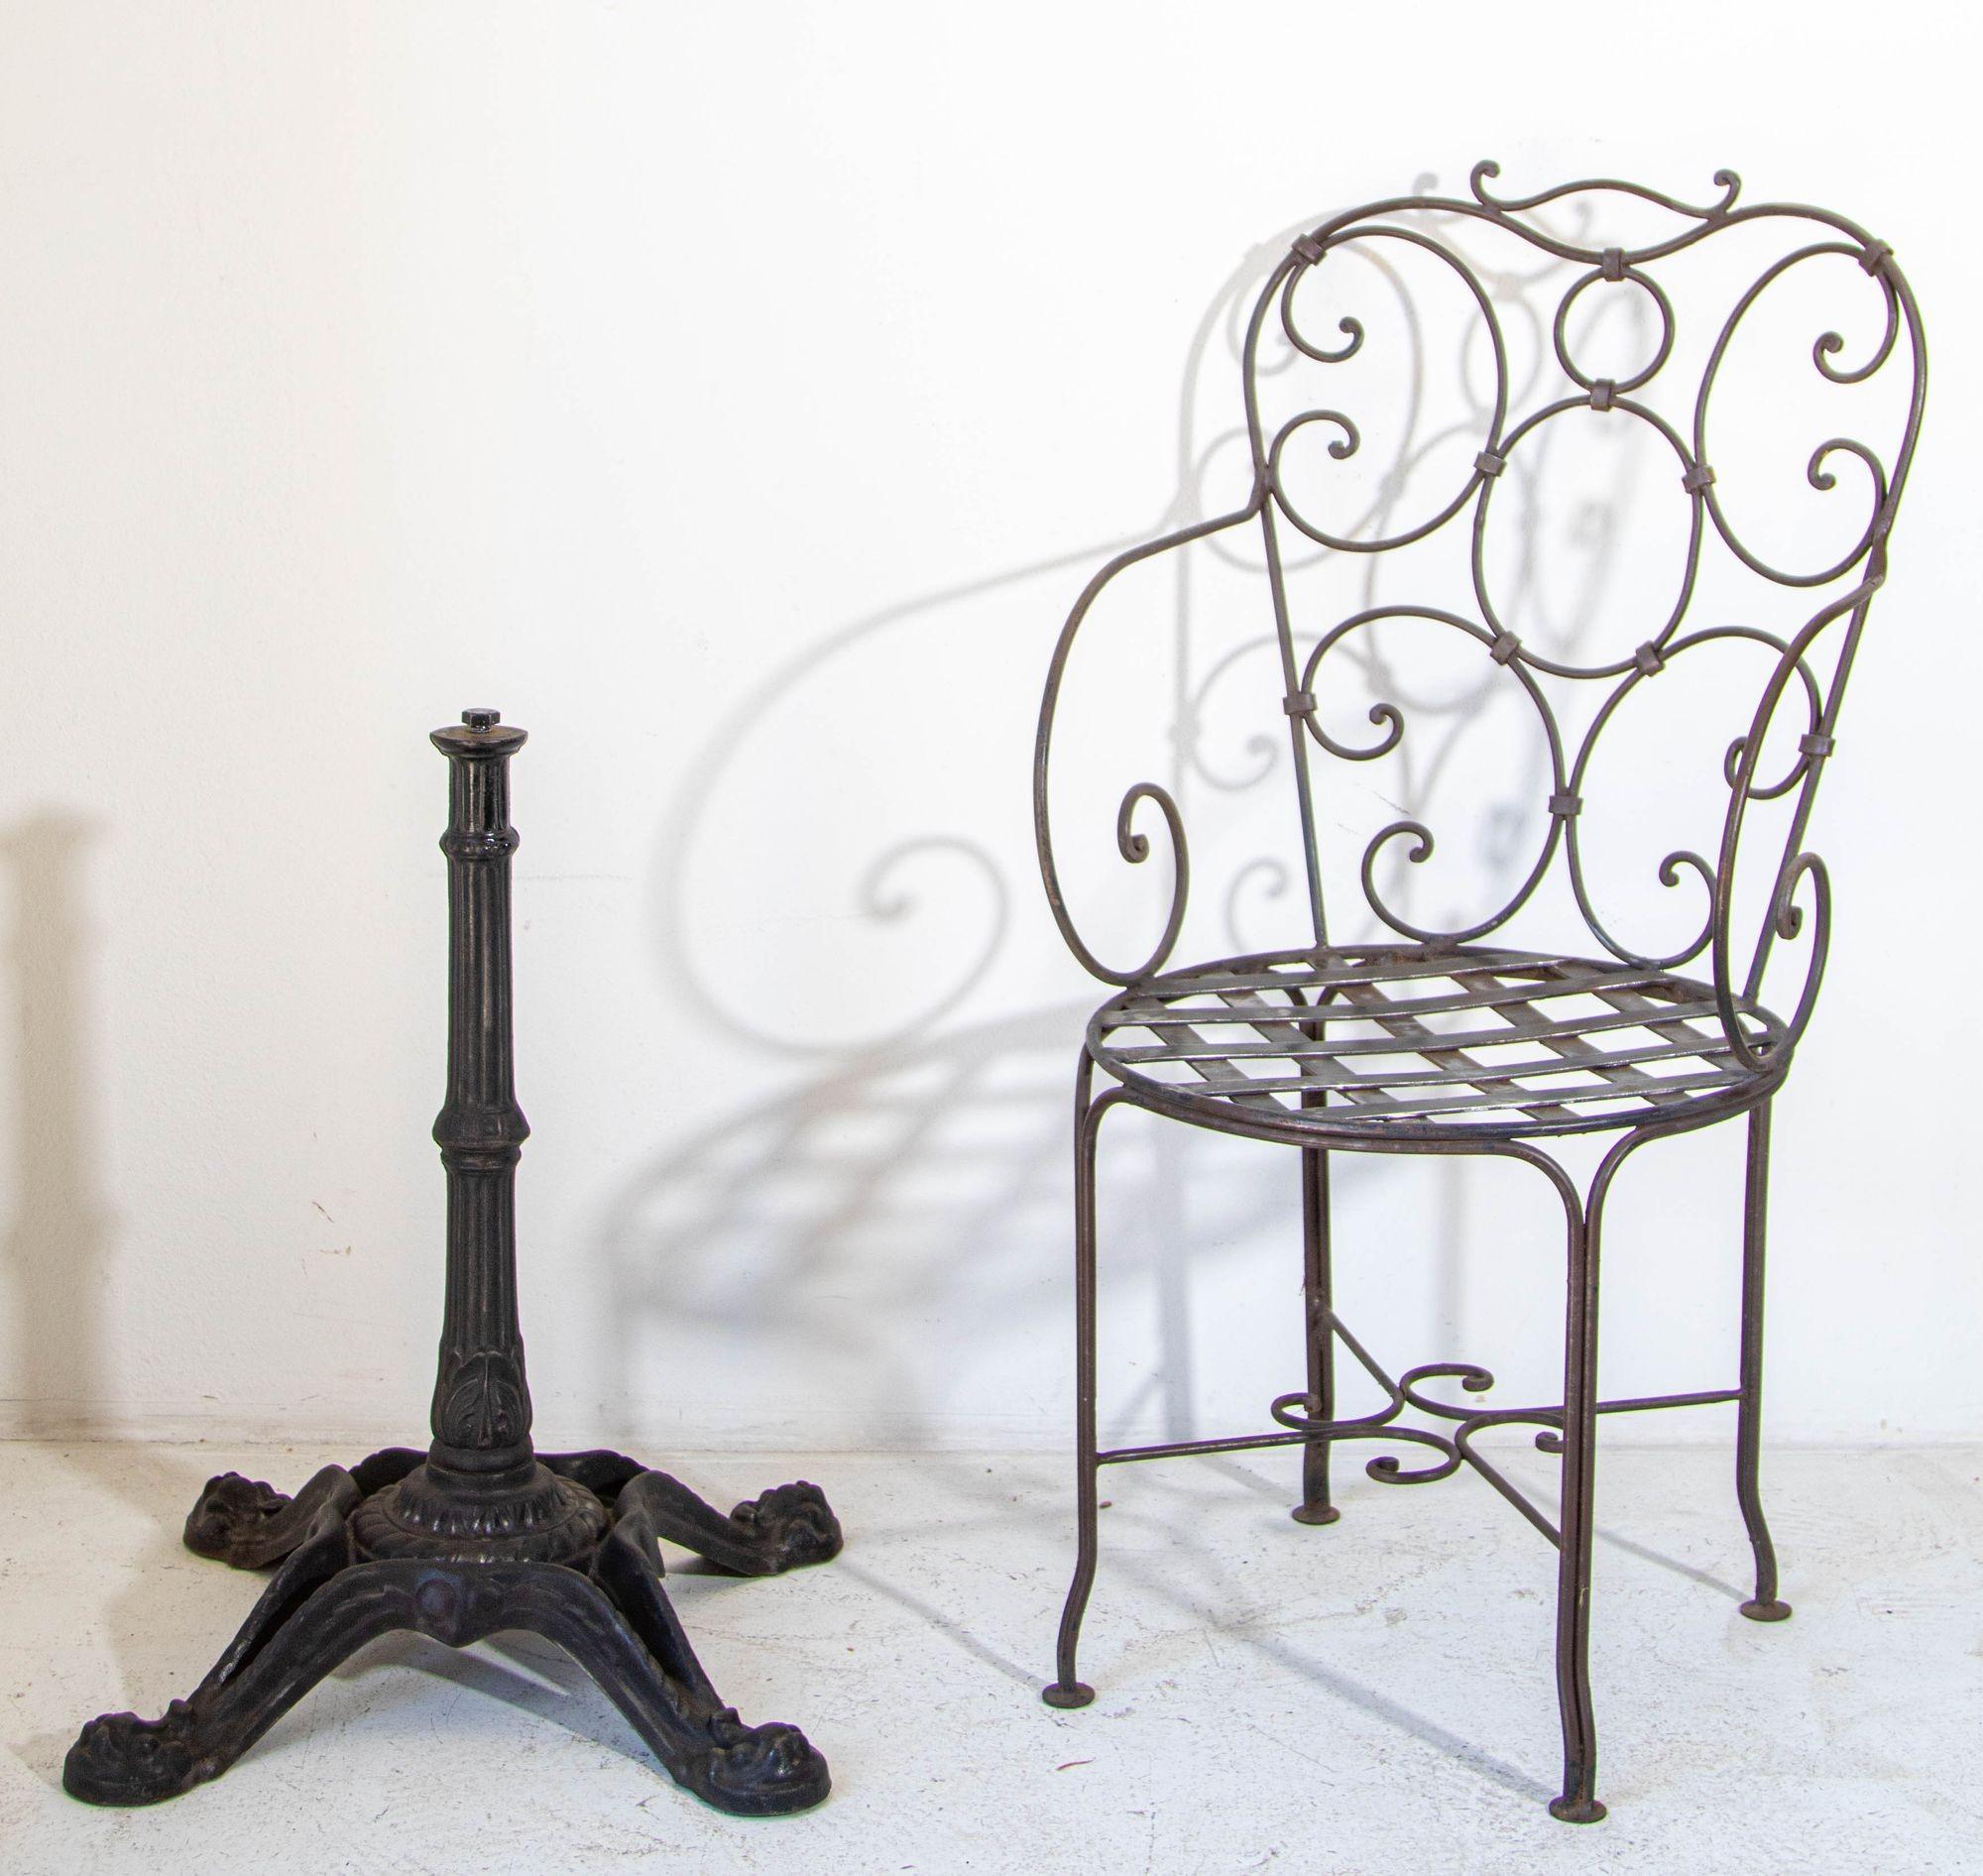 1920s Antique French Cast Iron Pedestal Bistro Table Stand.
Beautiful quality bistro table pedestals from France, made from heavy cast iron supported on 4 beautiful lion shaped legs.
French Bistro Table Paris cast iron pedestals table base.
Heavy